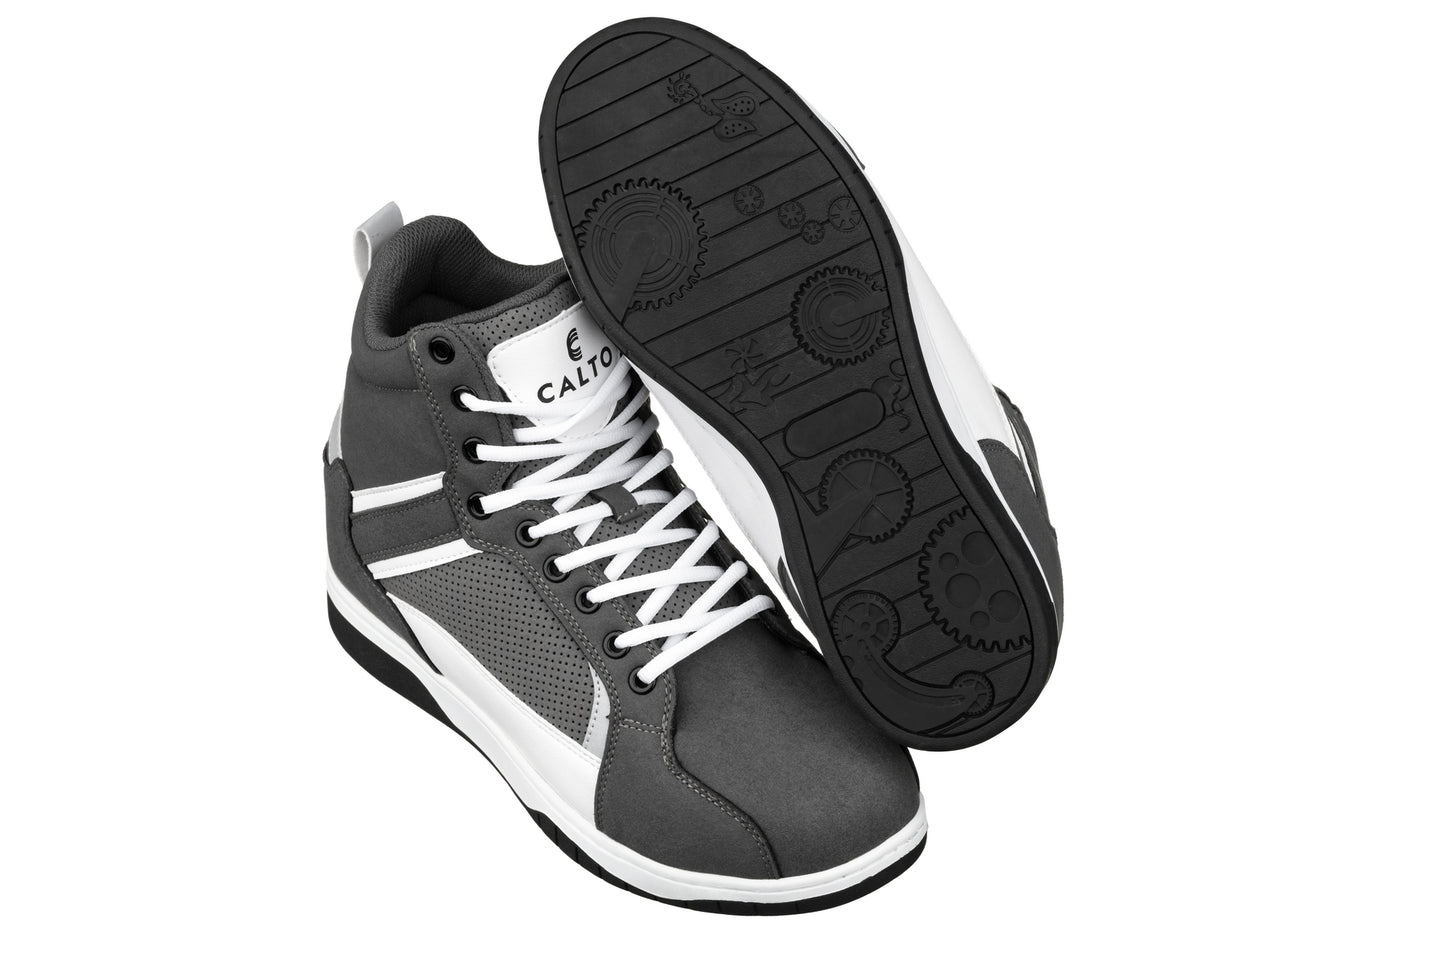 Elevator shoes height increase CALTO - S3721 - 3.2 Inches Taller (Grey/White) - Sneakers